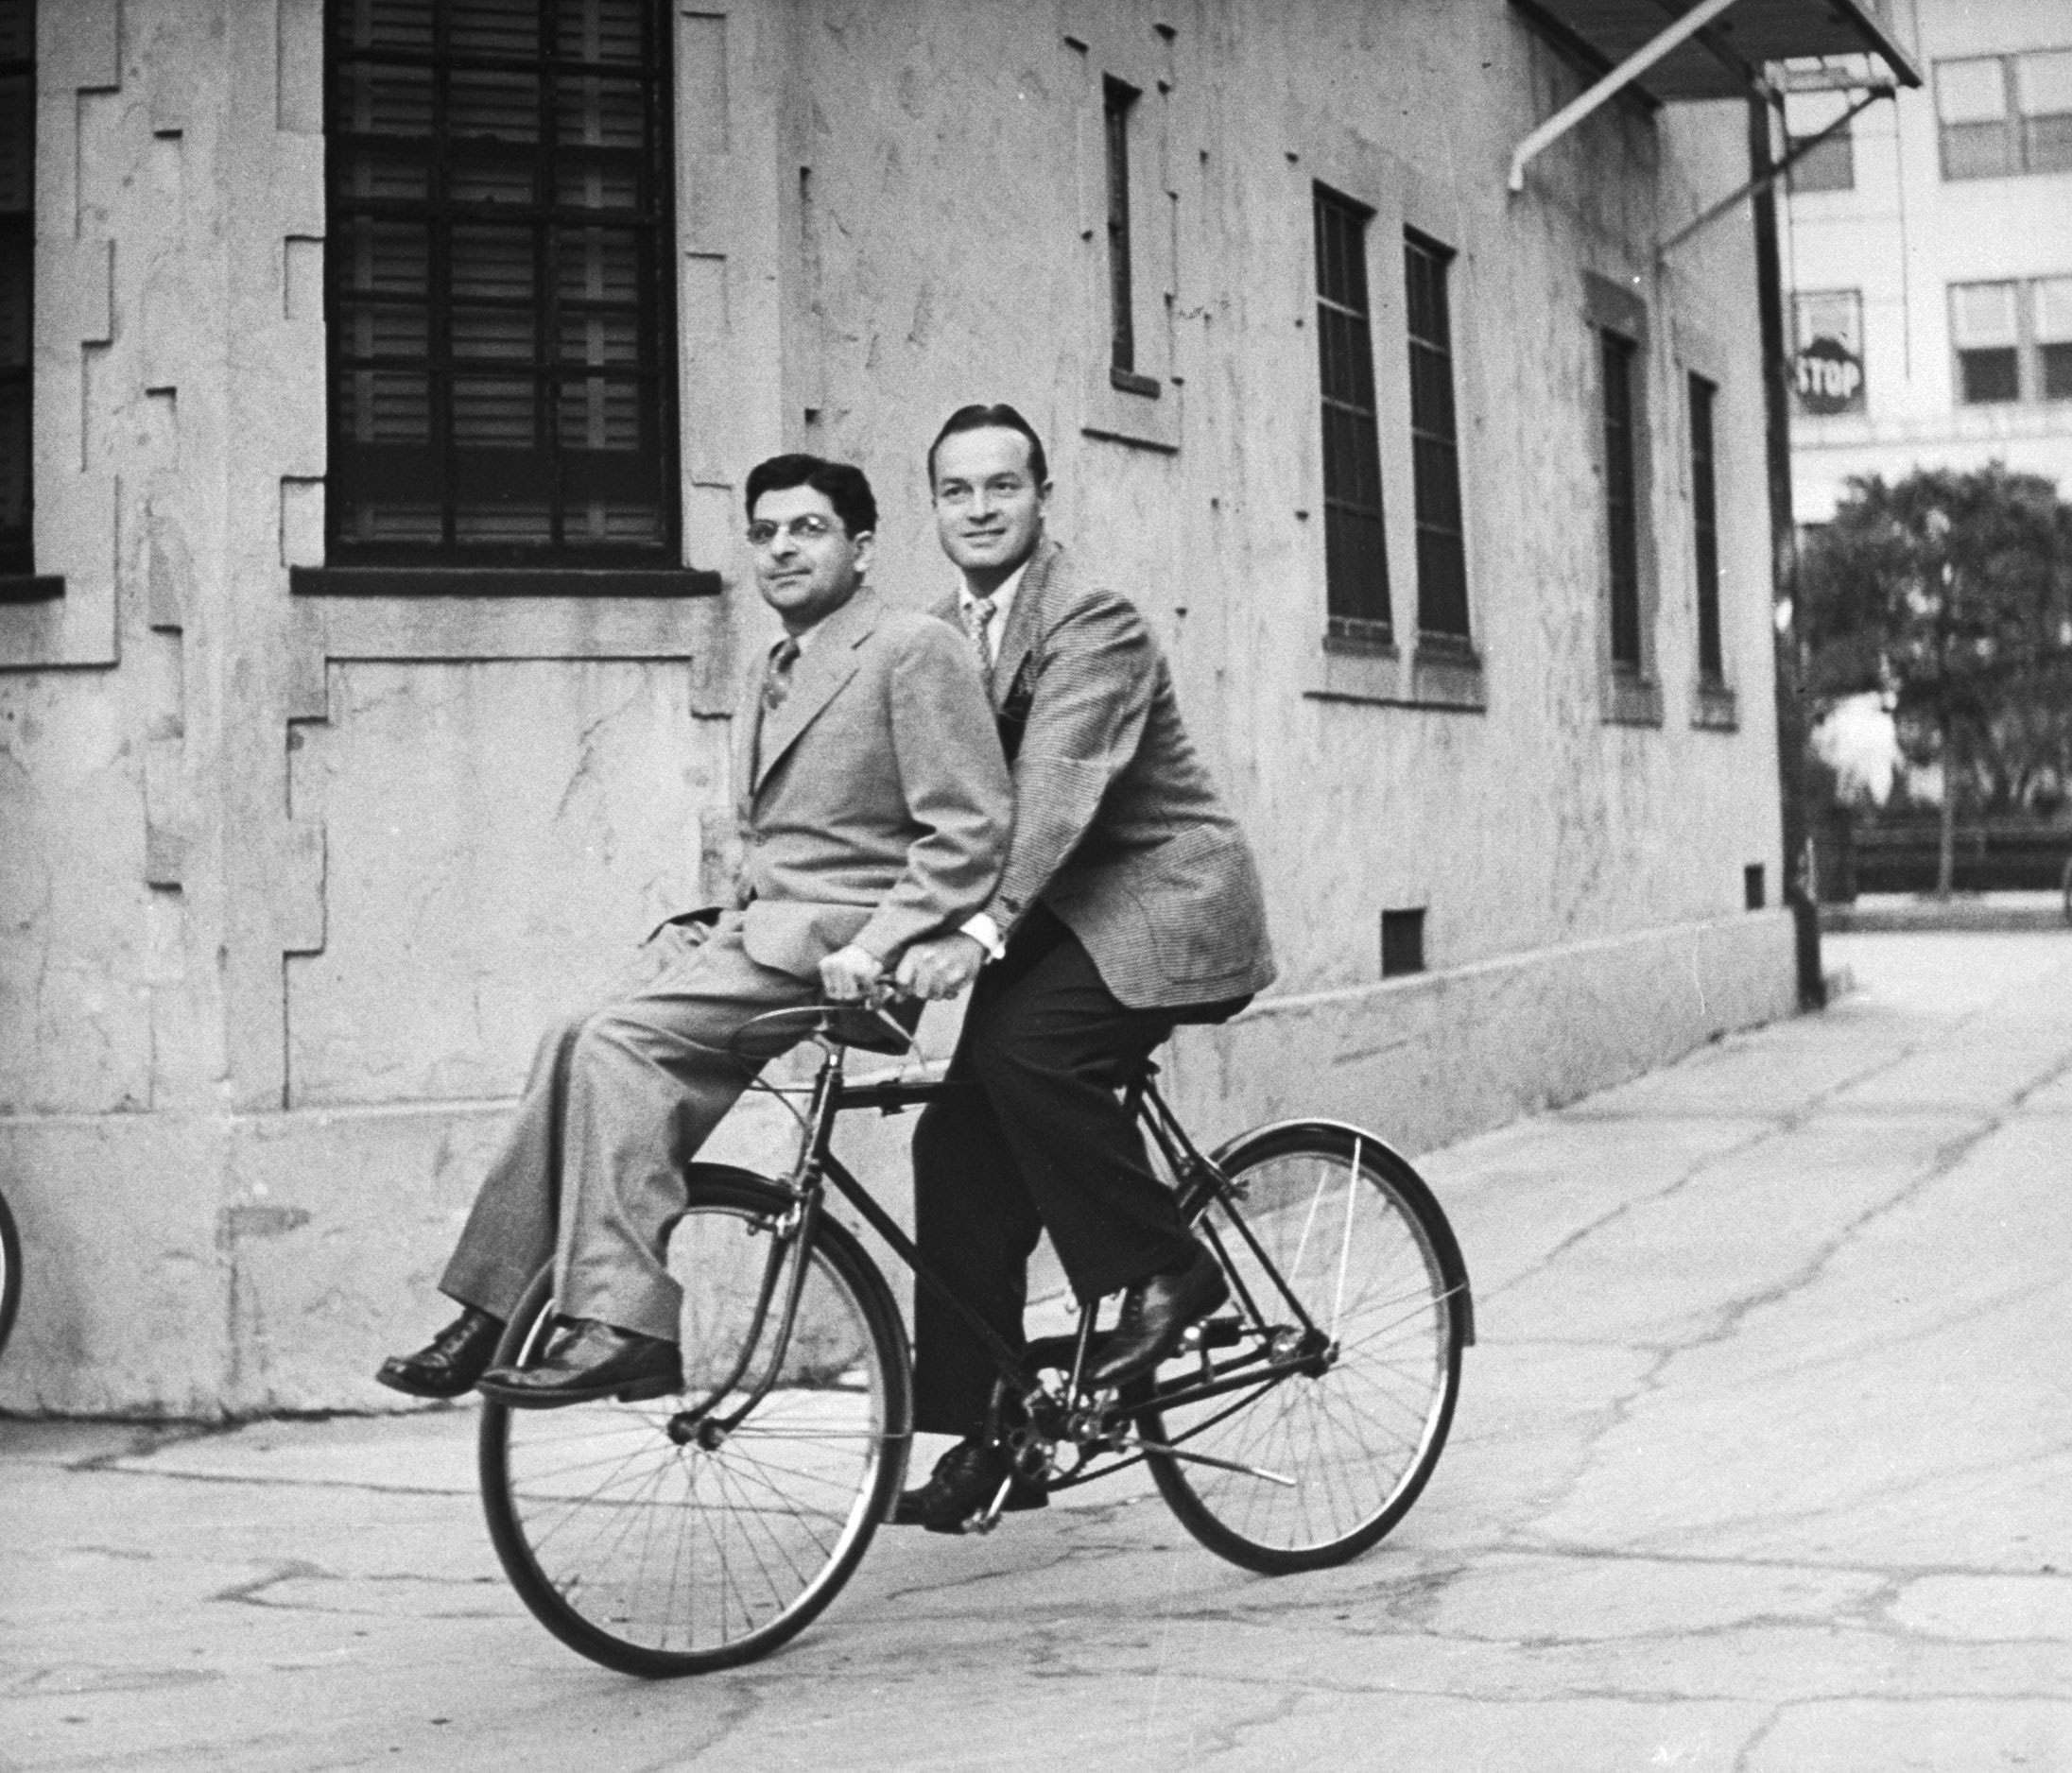 Columnist Sidney Skolsky catching a ride on Bob Hope's bicycle on Hope's way from his dressing room to a sound stage, 1943.